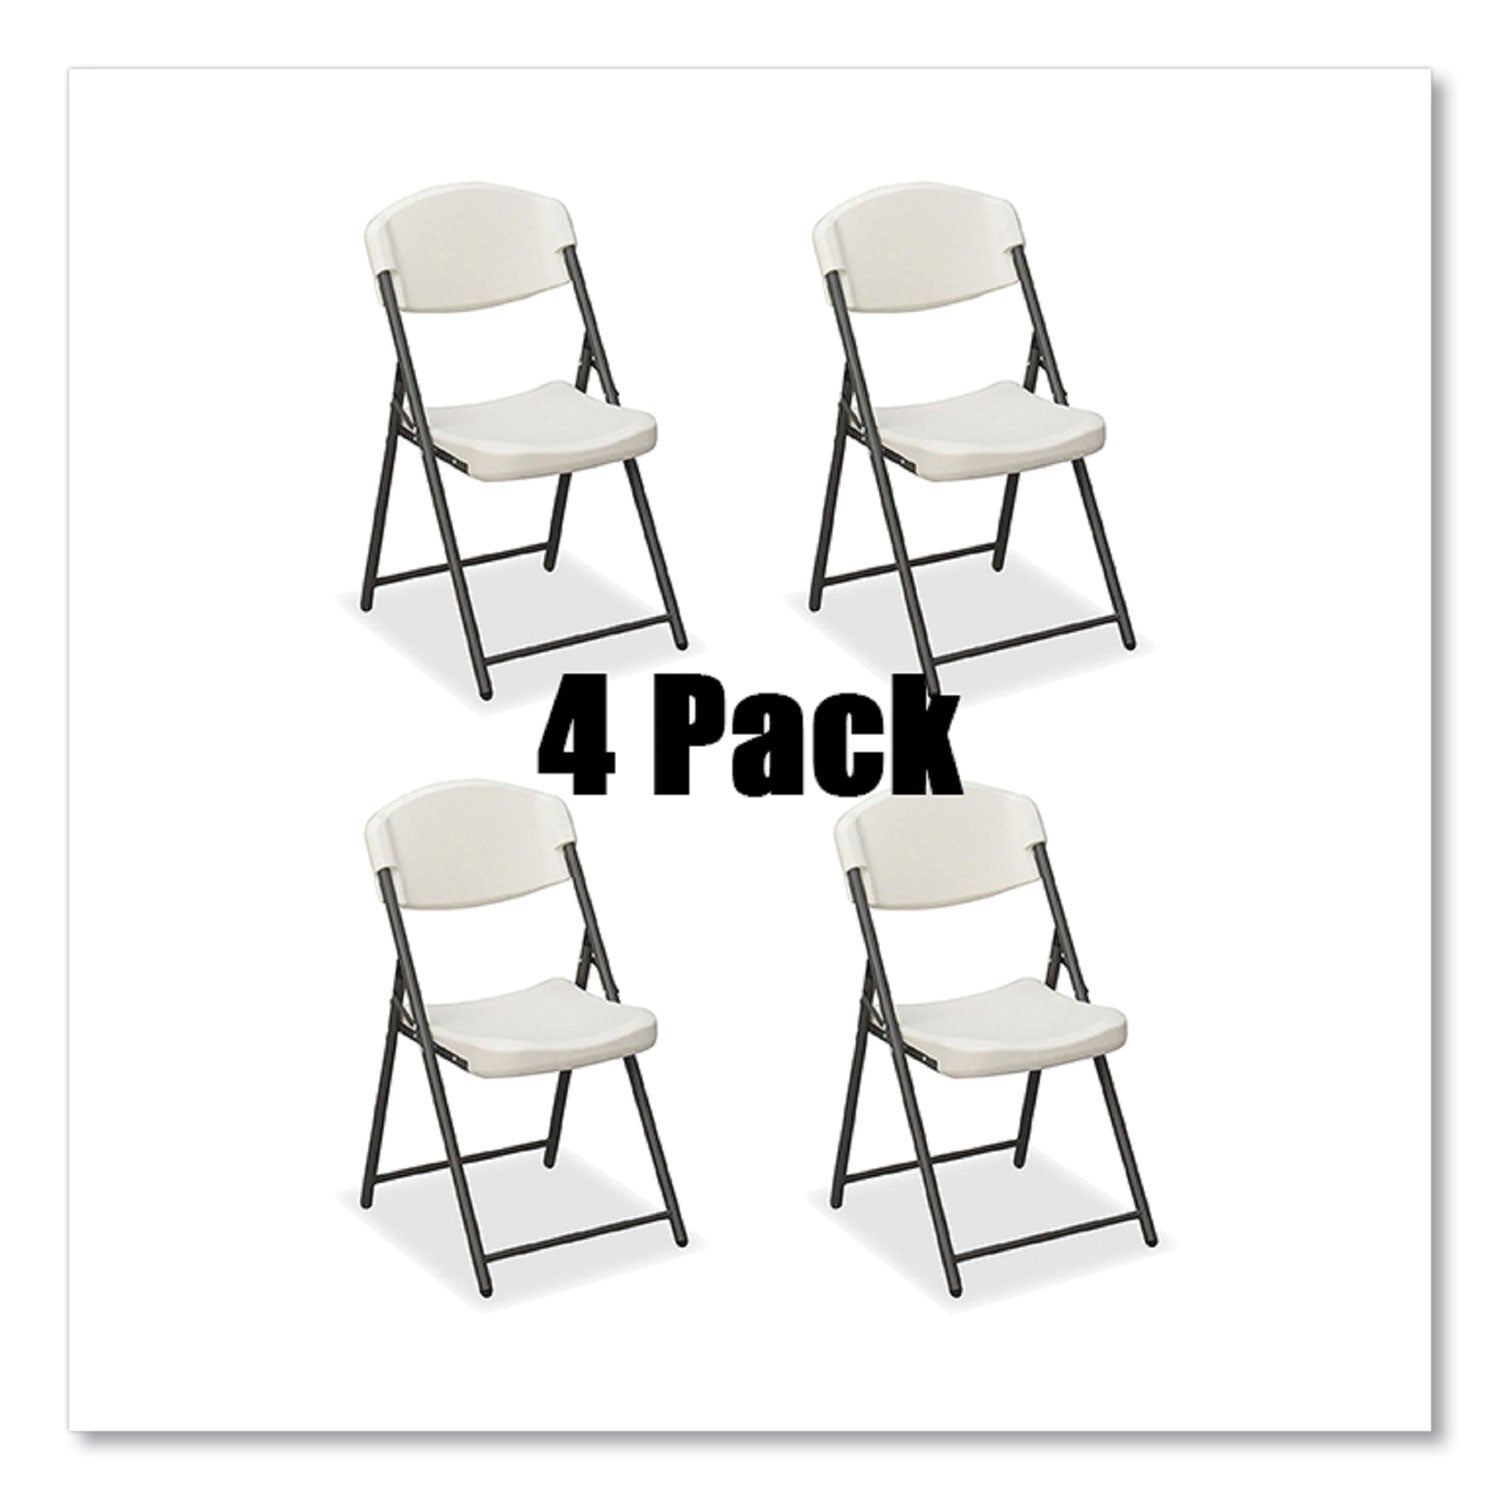 rough-n-ready-commercial-folding-chair-supports-up-to-350lb-18-seat-height-platinum-granite-seat-back-black-base-4-pack_ice64033 - 4